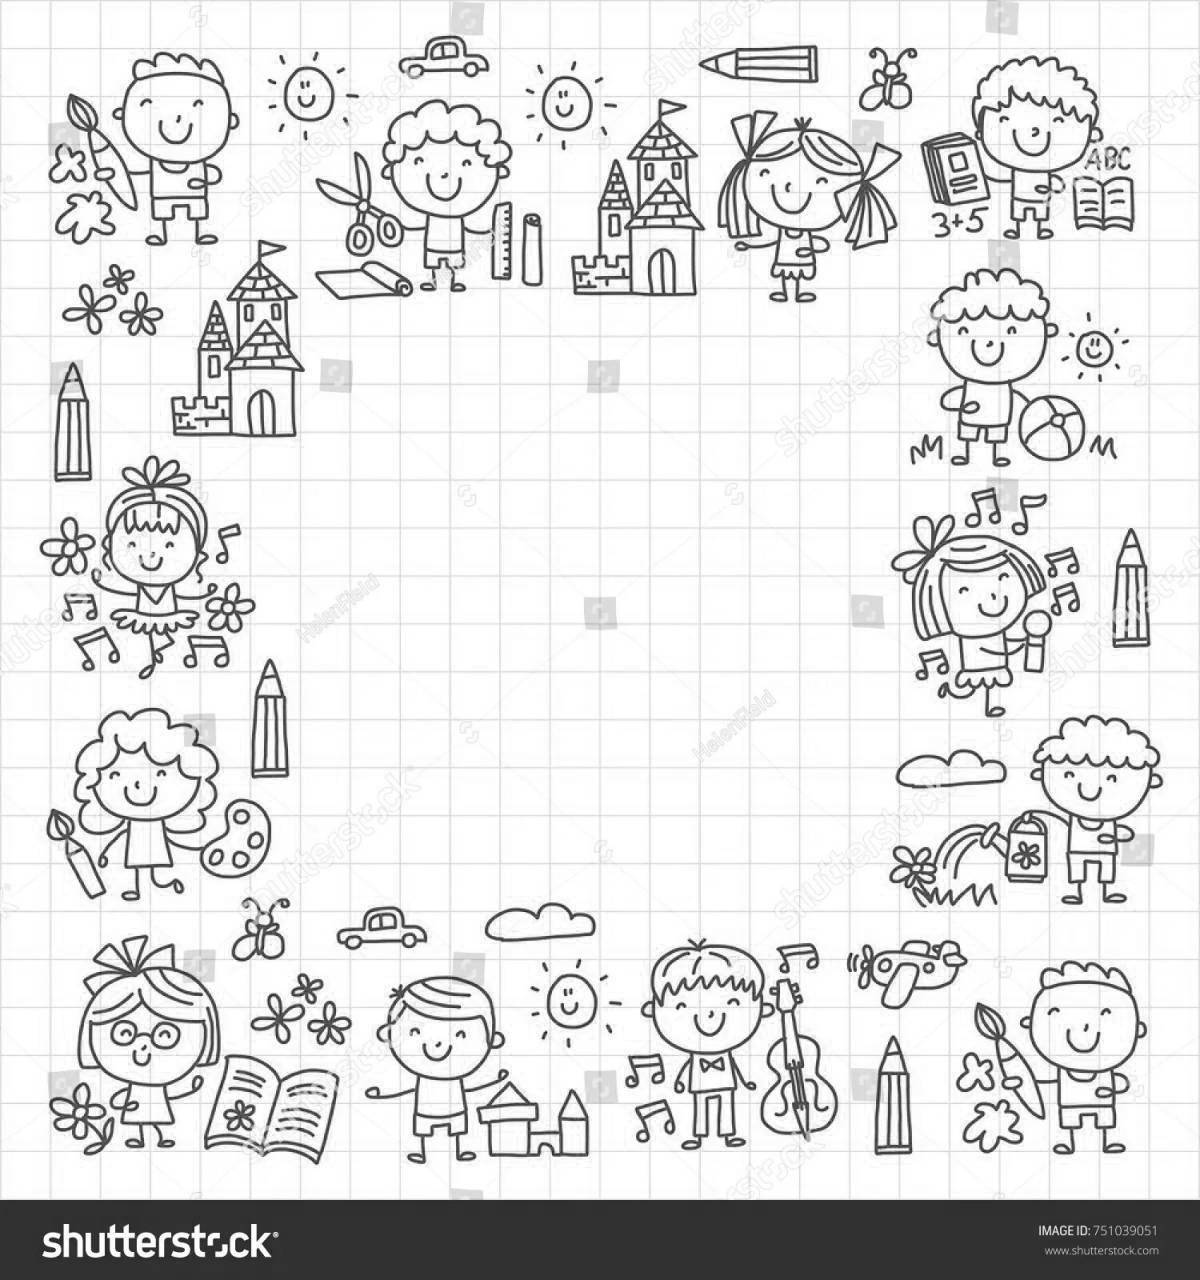 Innovative 2nd grade student daily routine coloring page template